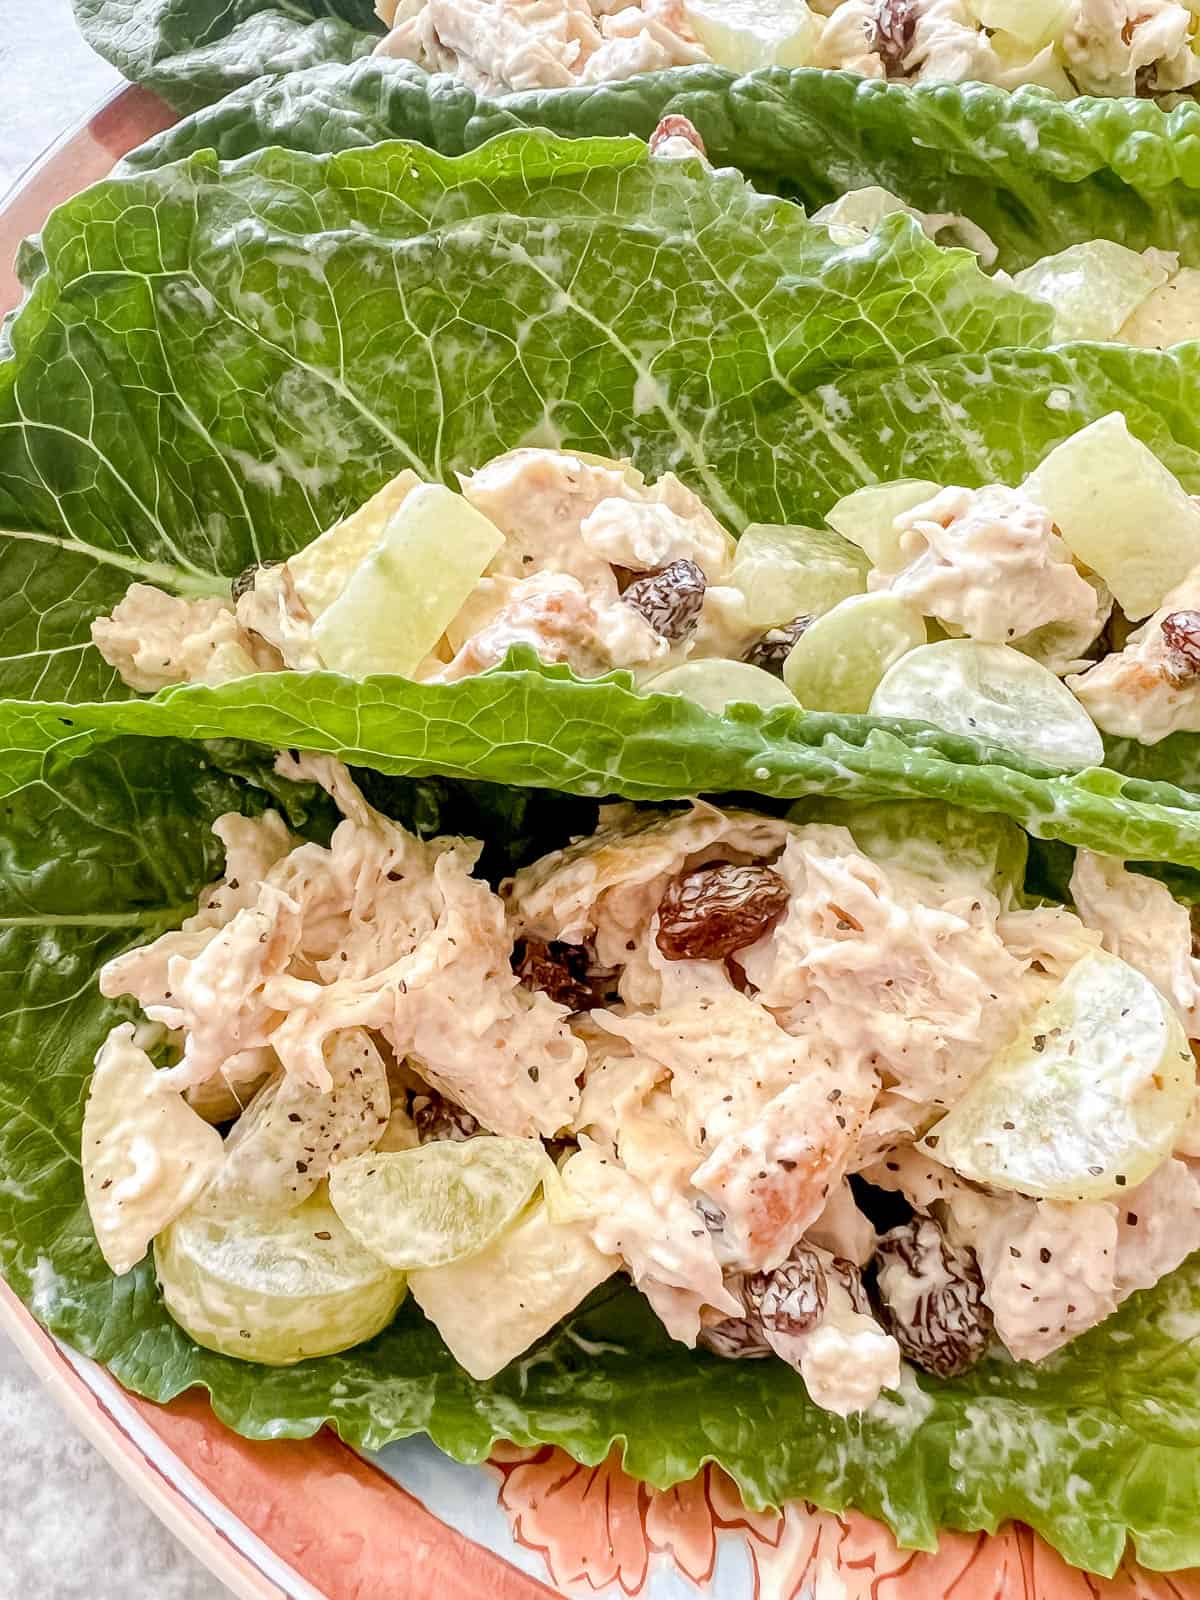 Lettuce wrap chicken salad on a plate.